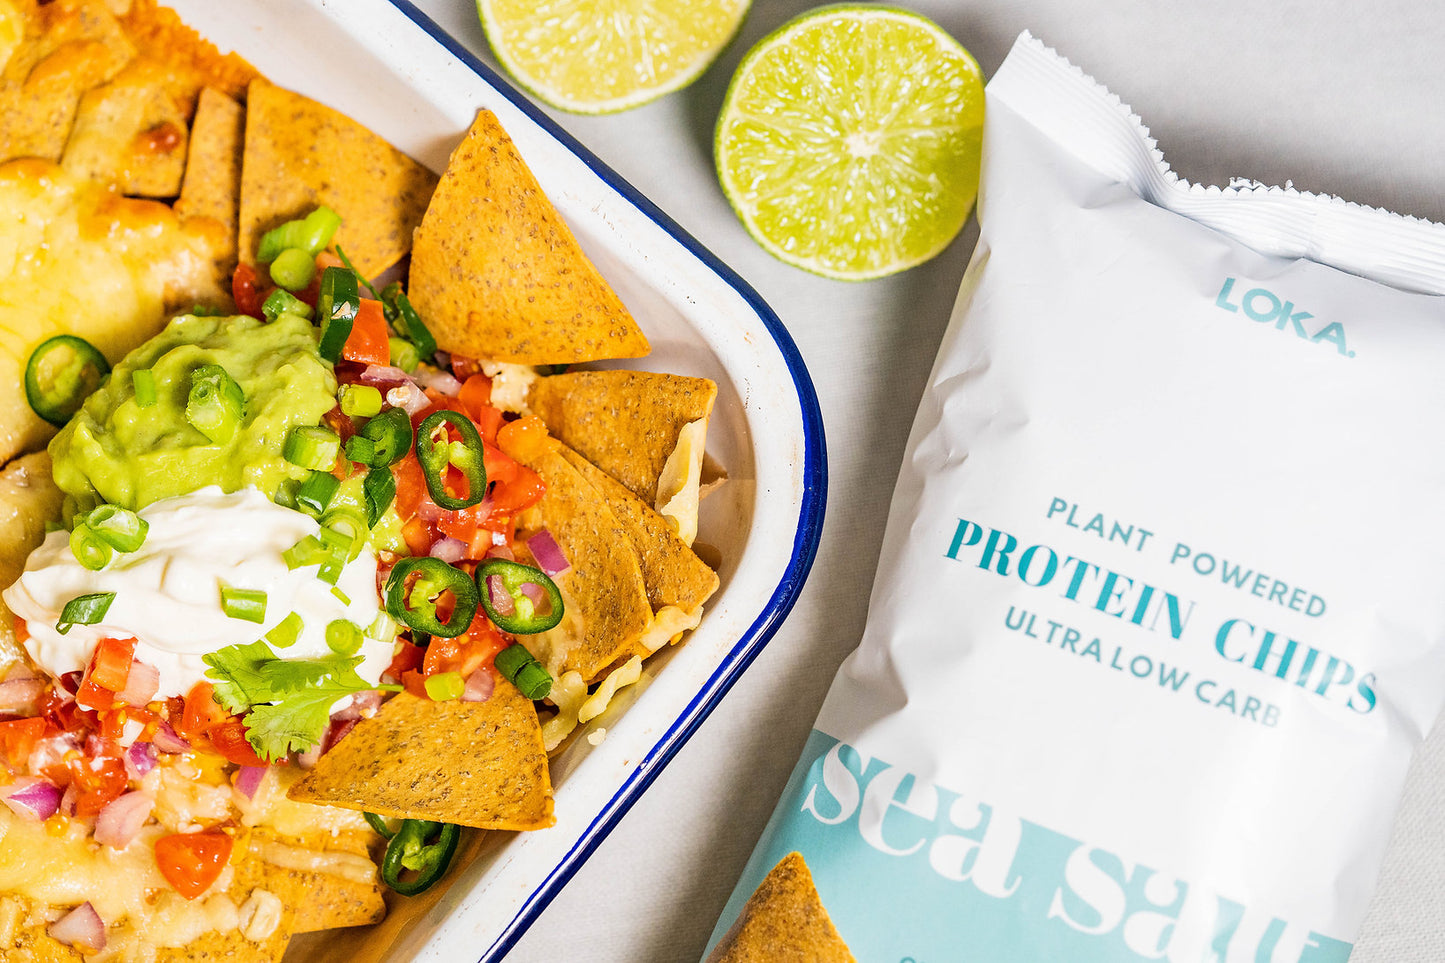 Loka Plant Powered Protein Chips